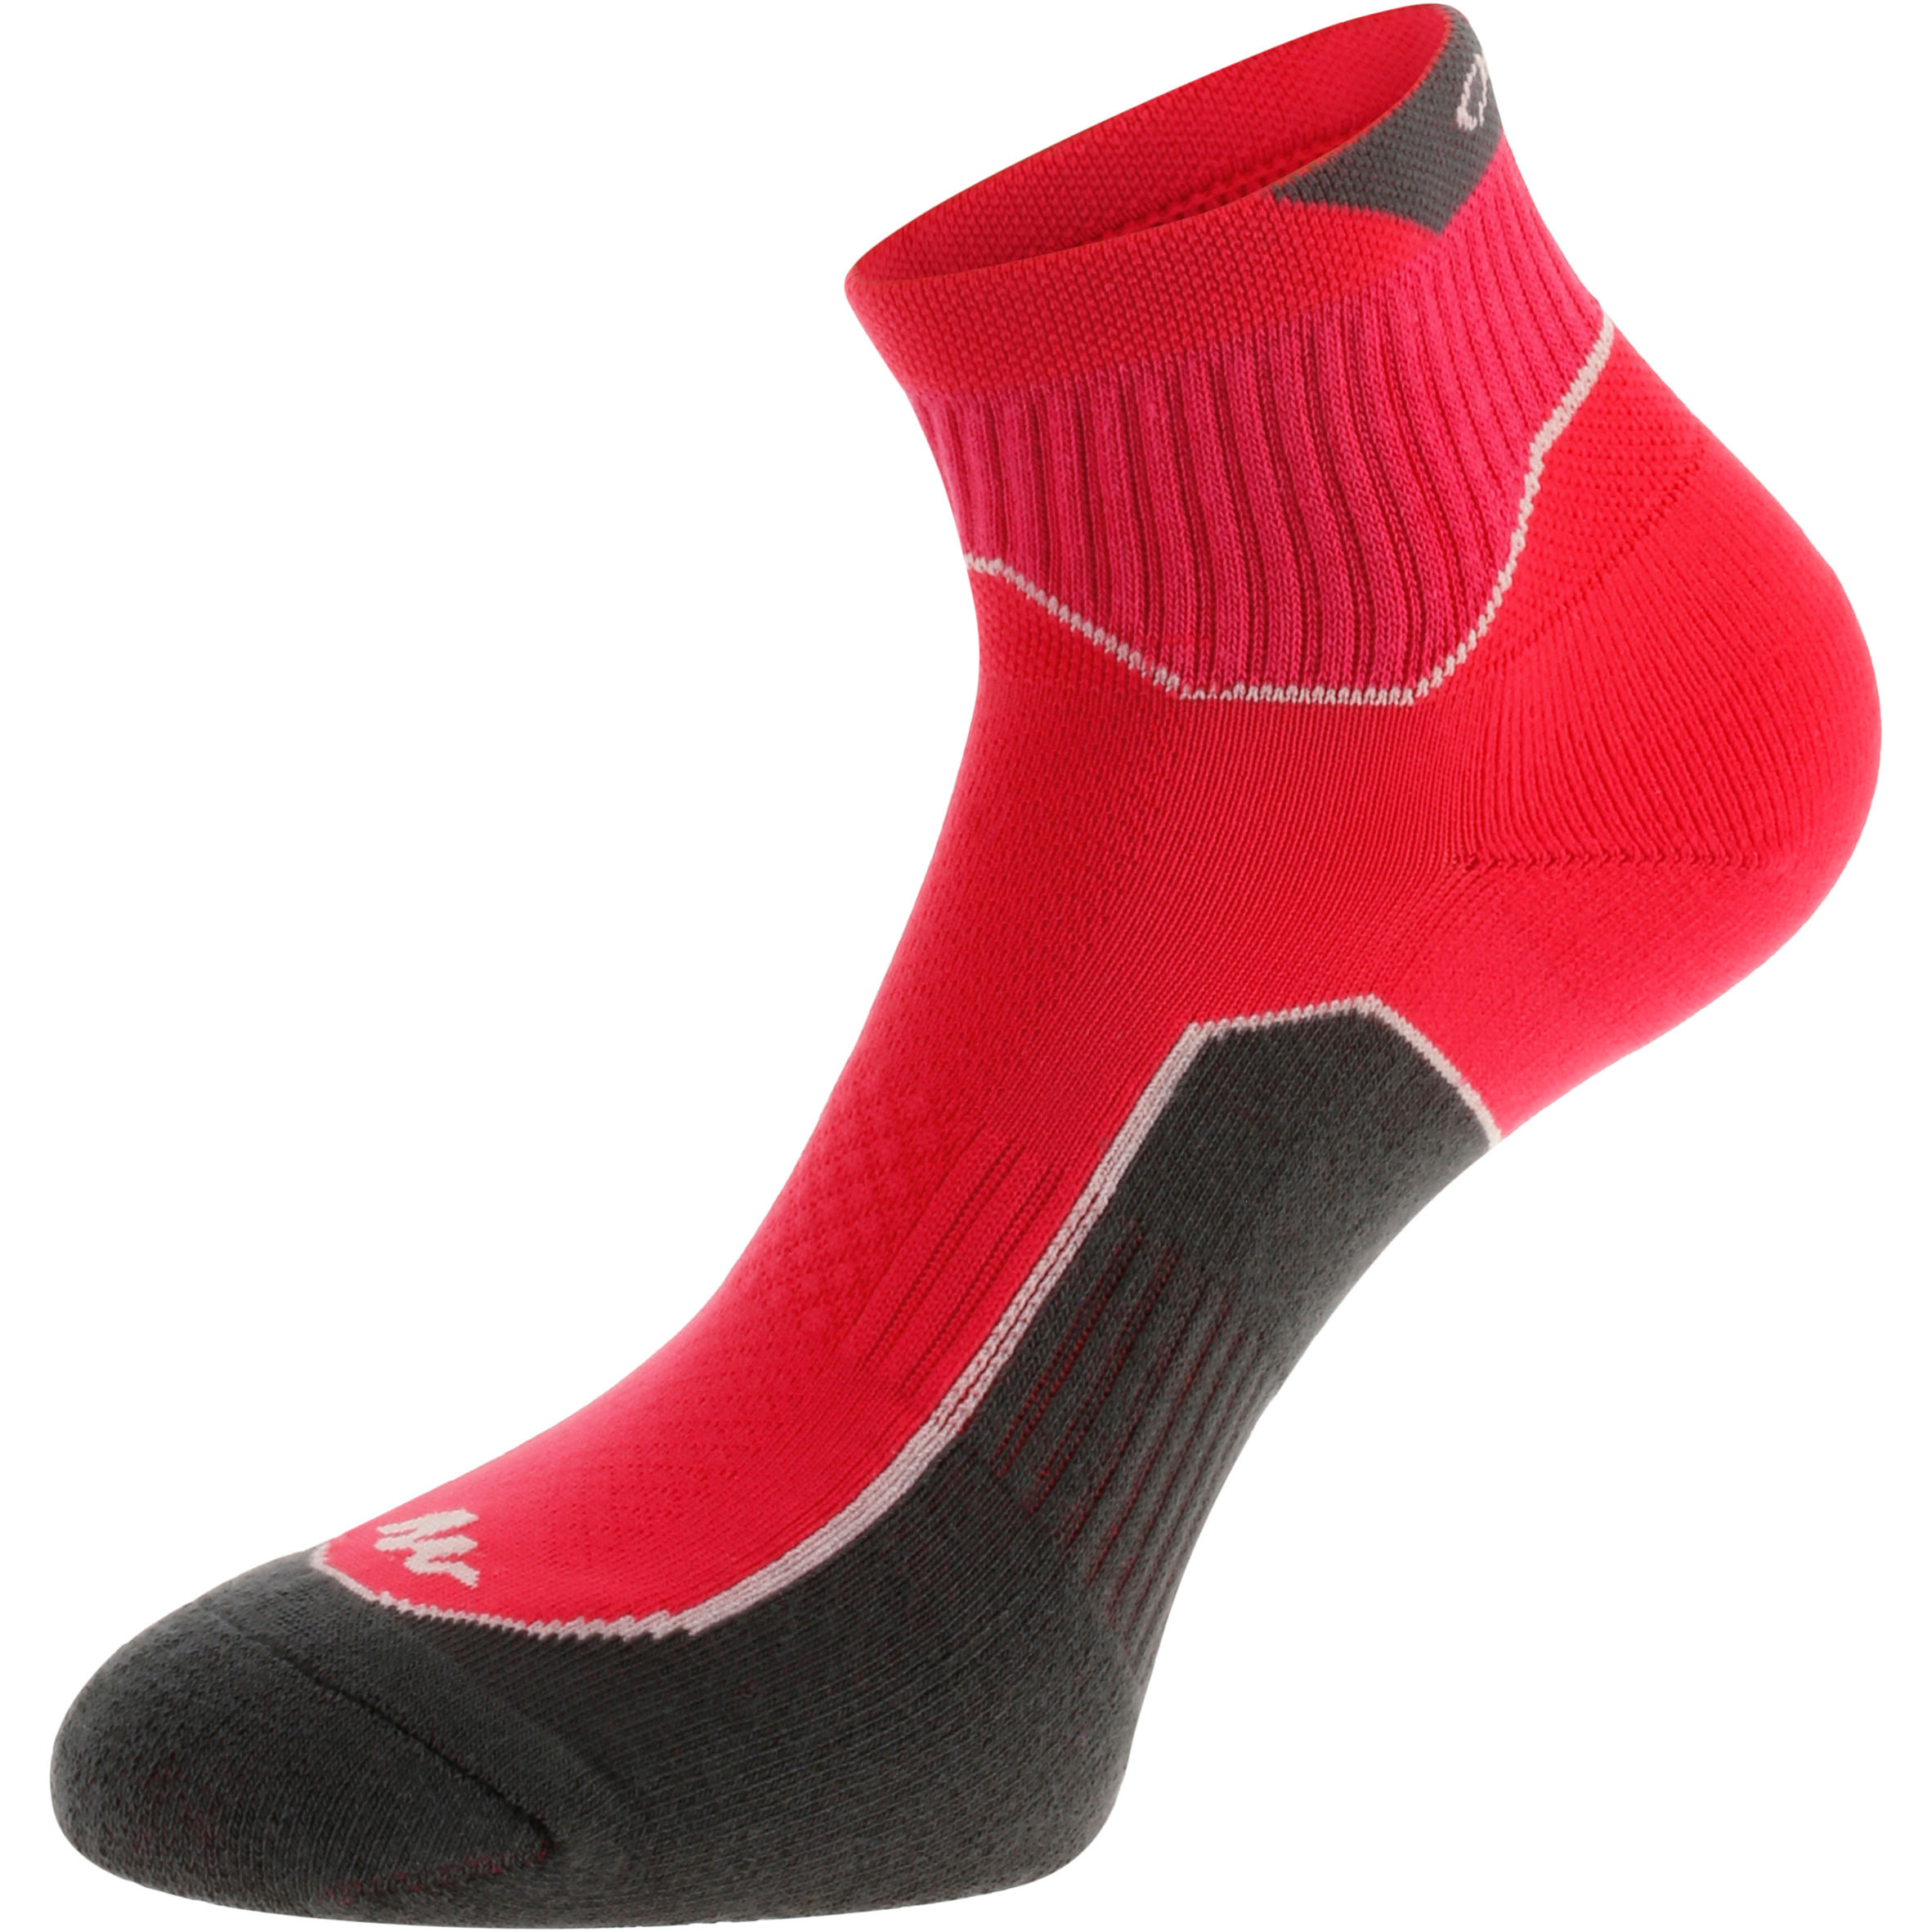 2 pairs of adult’s short Arpenaz 100 hiking socks in pink. 3/8